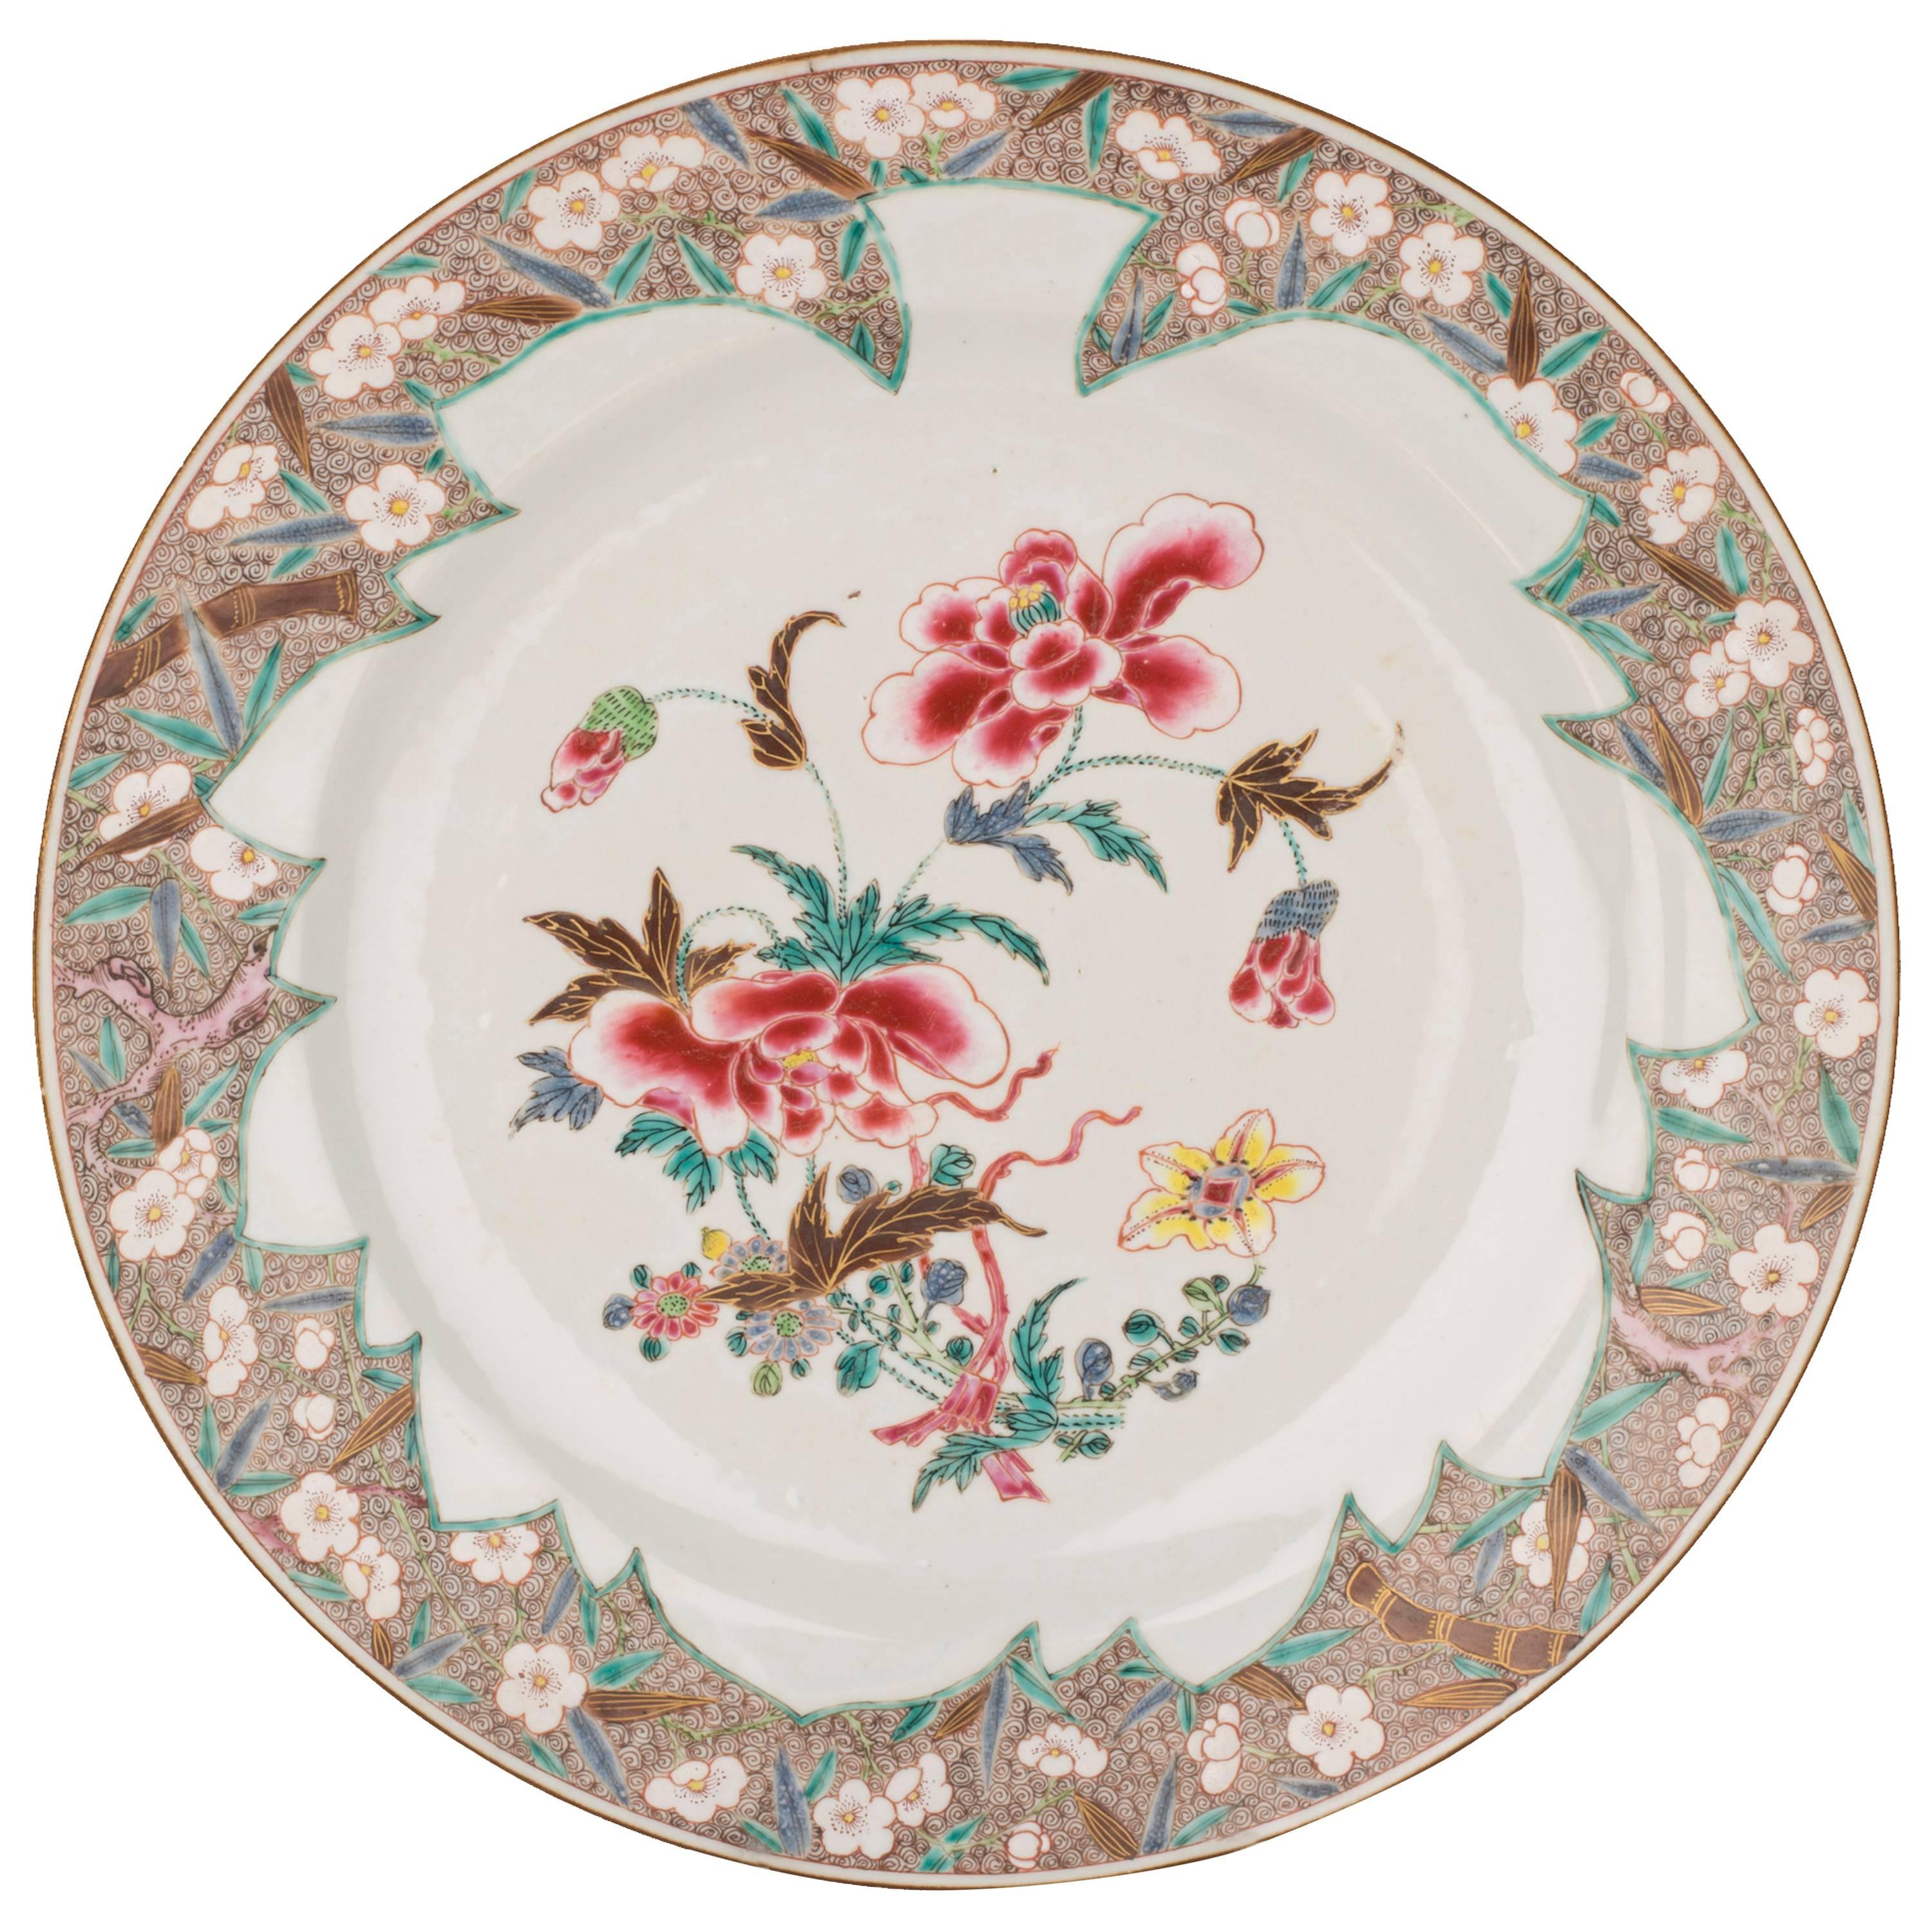 Chinese Porcelain Famille Rose Large Plate Bouquet Flowers, 18th Century